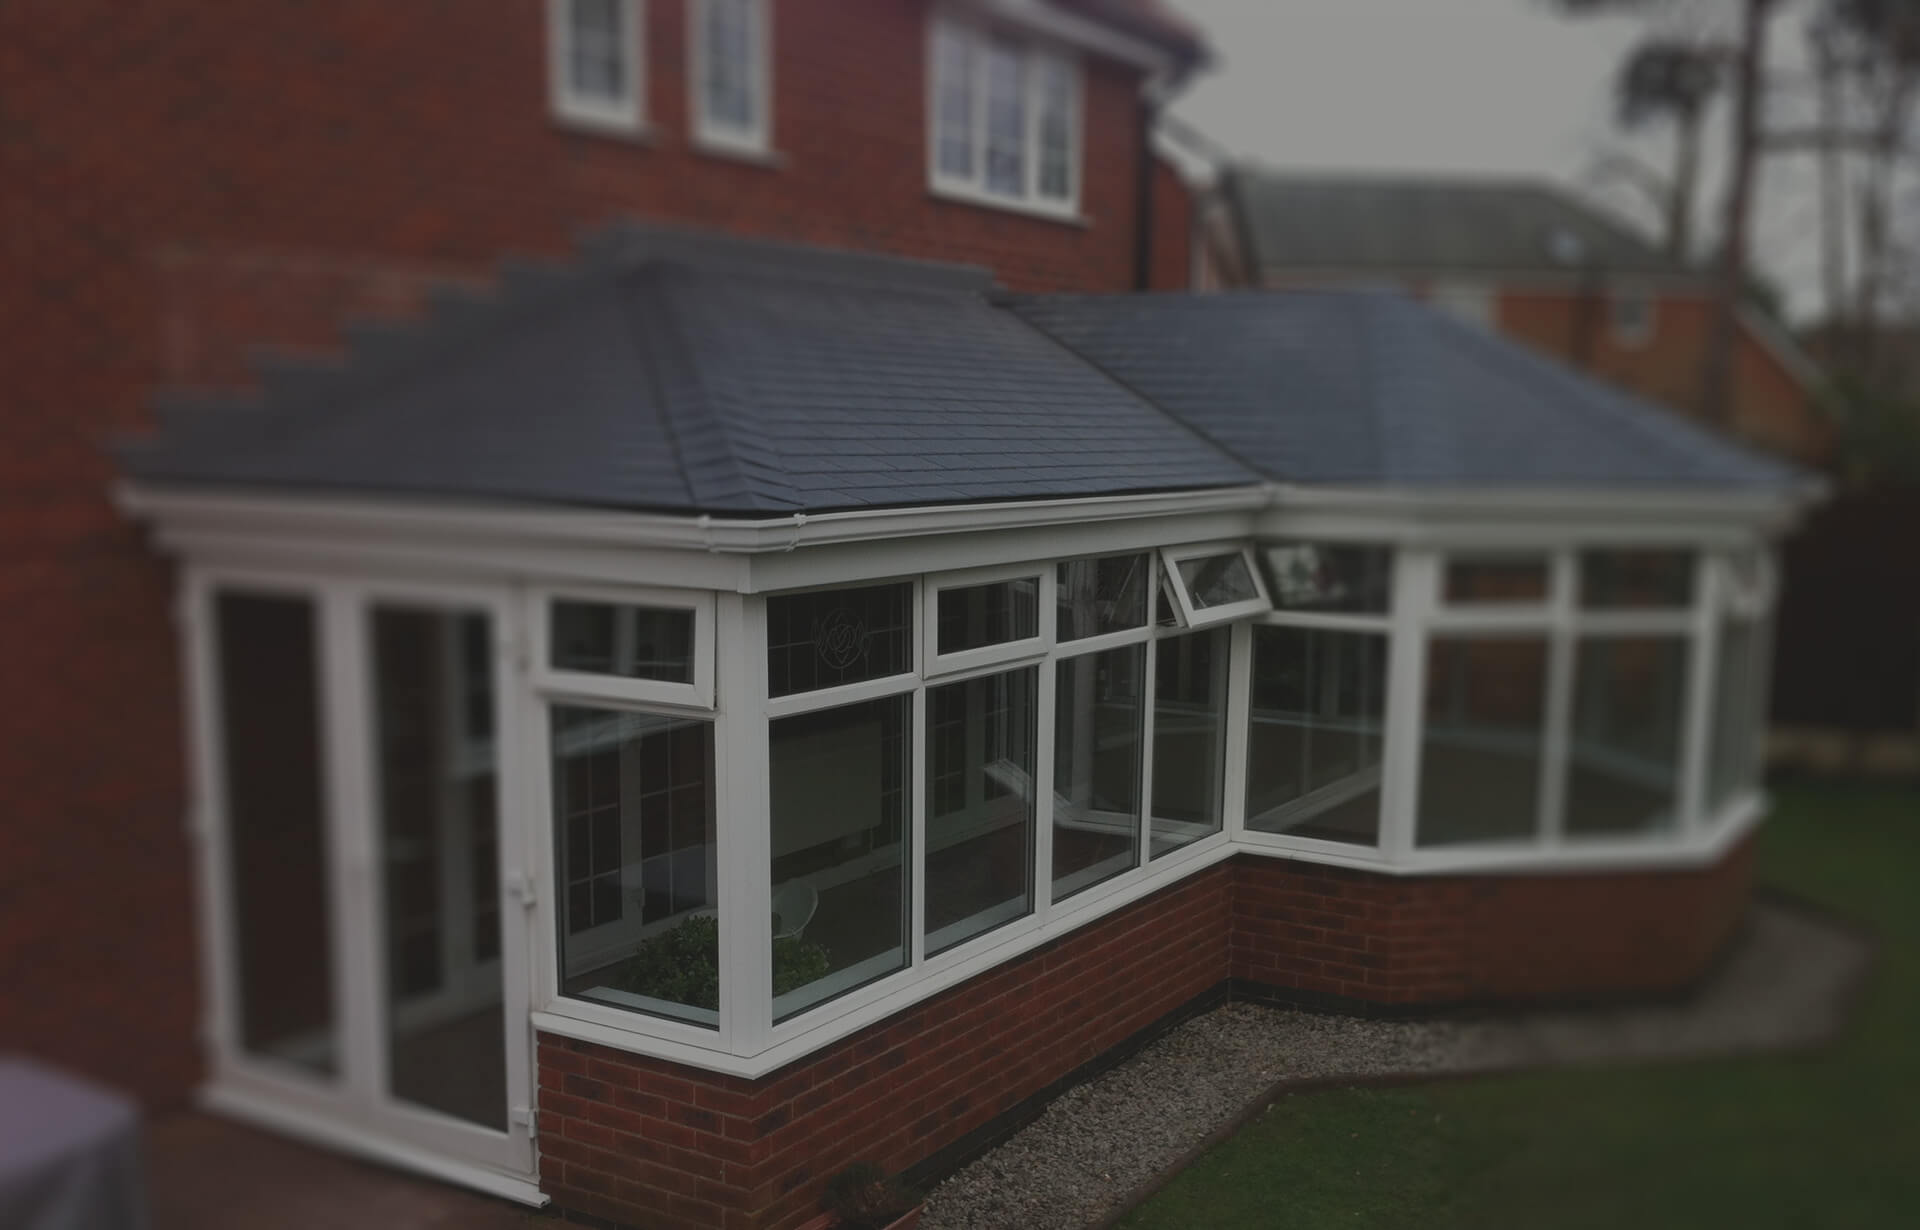 P Shaped conservatory with a tiled roof